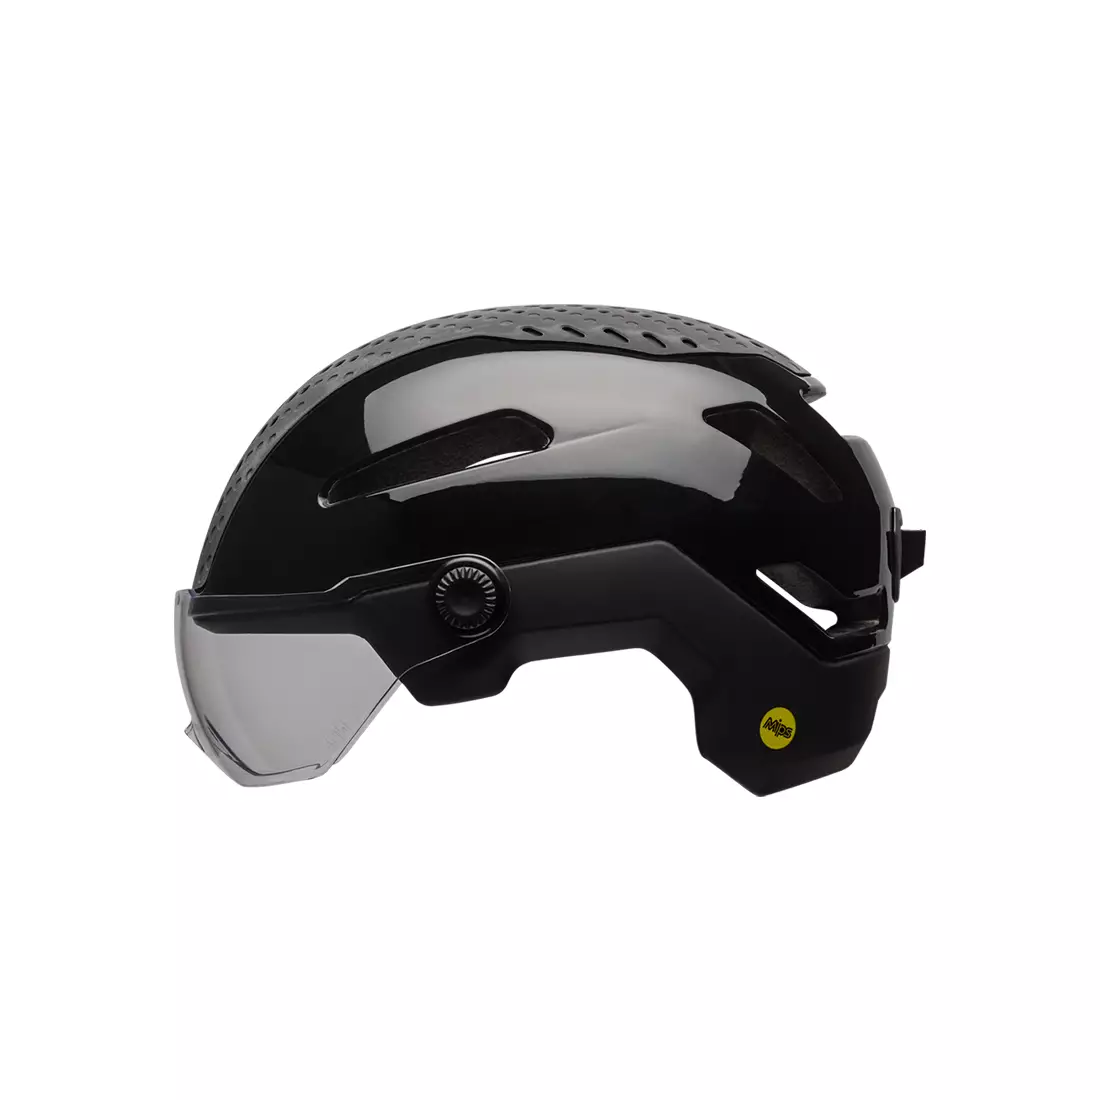 BELL ANNEX SHIELD INTEGRATED MIPS city bicycle helmet, black